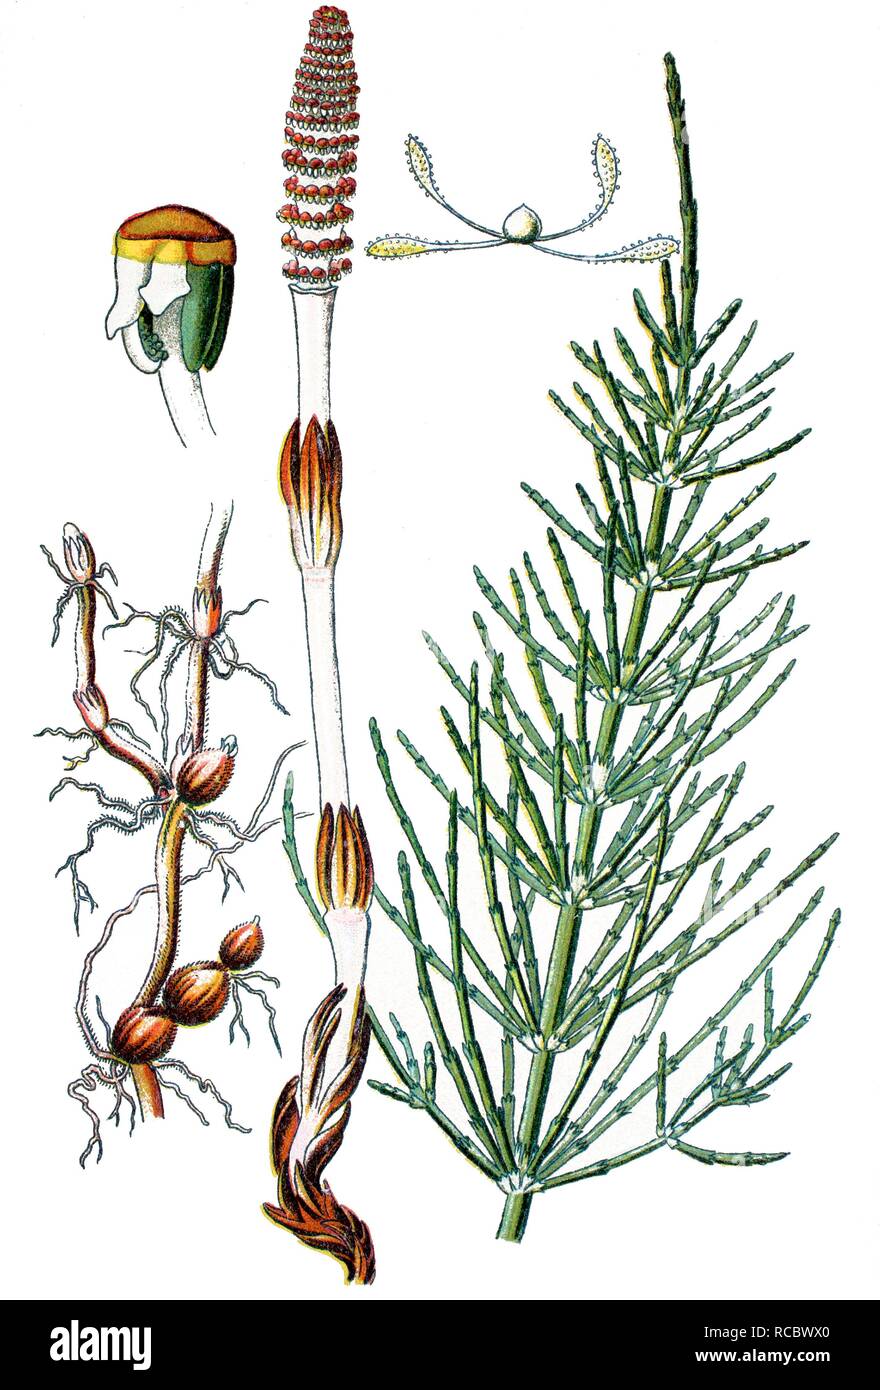 Field Horsetail or Common Horsetail (Equisetum arvense), a medicinal plant, historical chromolithography, ca. 1870 Stock Photo